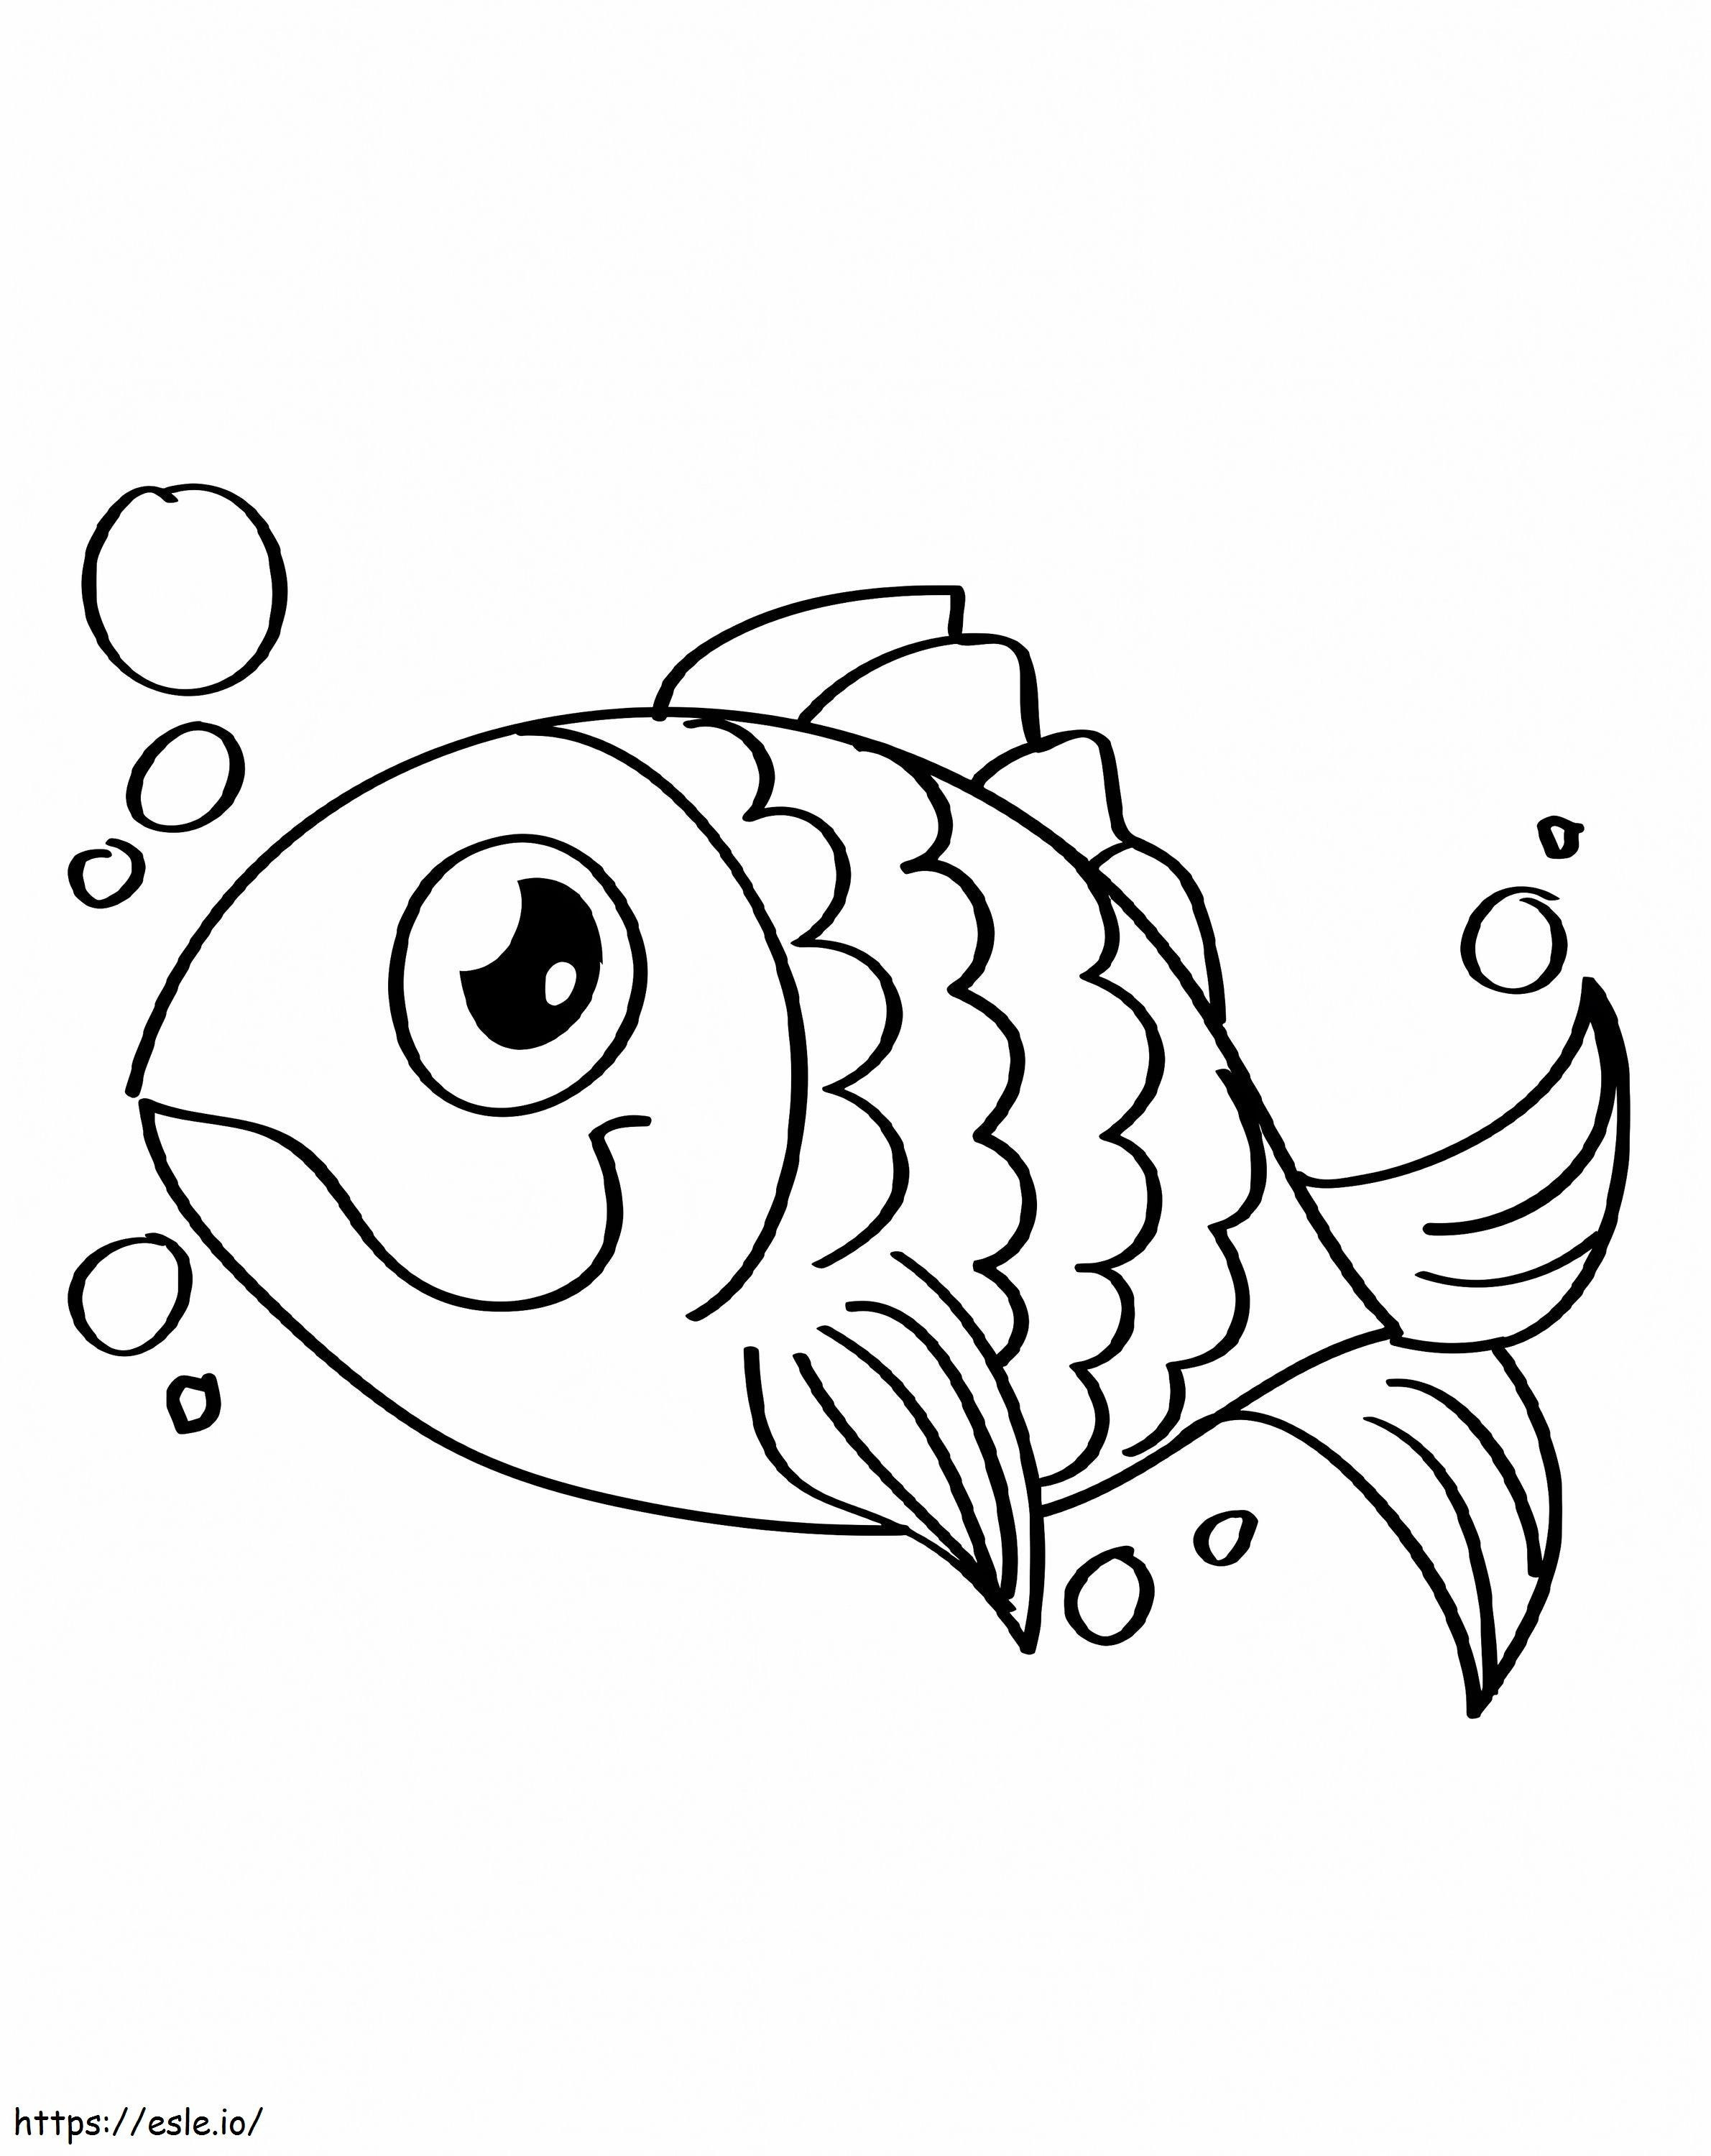 Adorable Fish coloring page